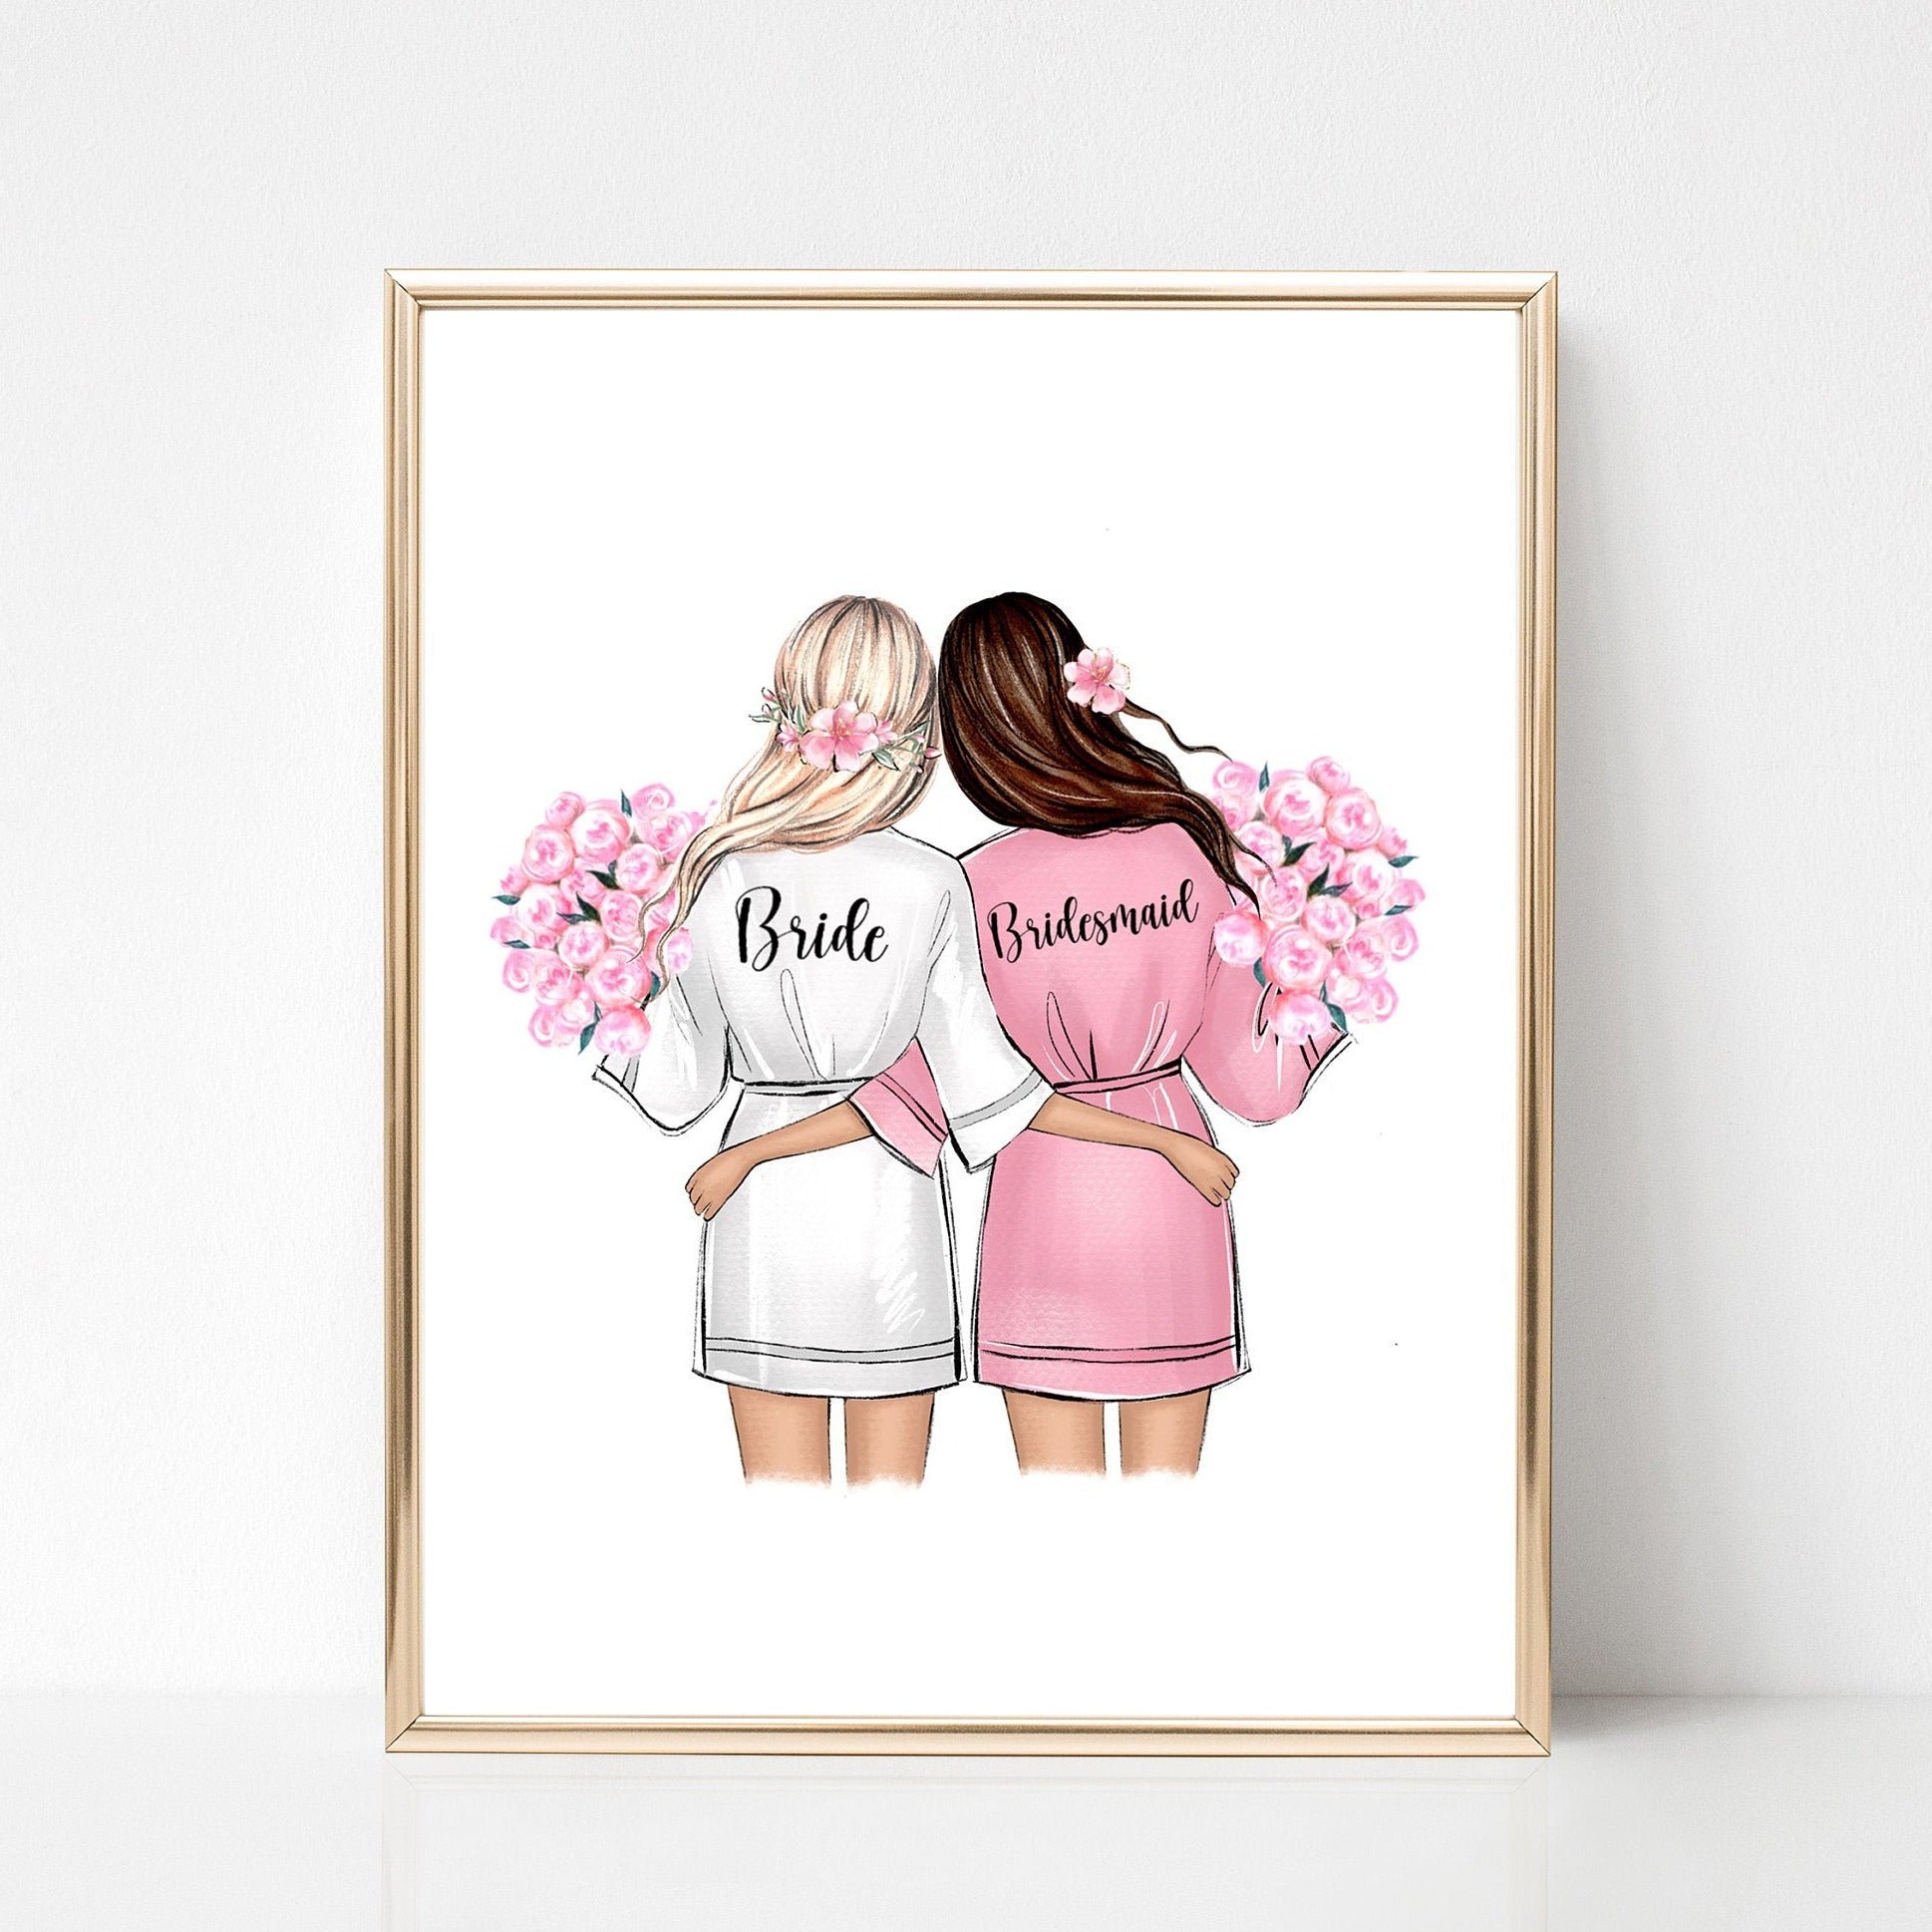 Personalized bride and bridesmaid in robes art print. Customizable wedding illustration